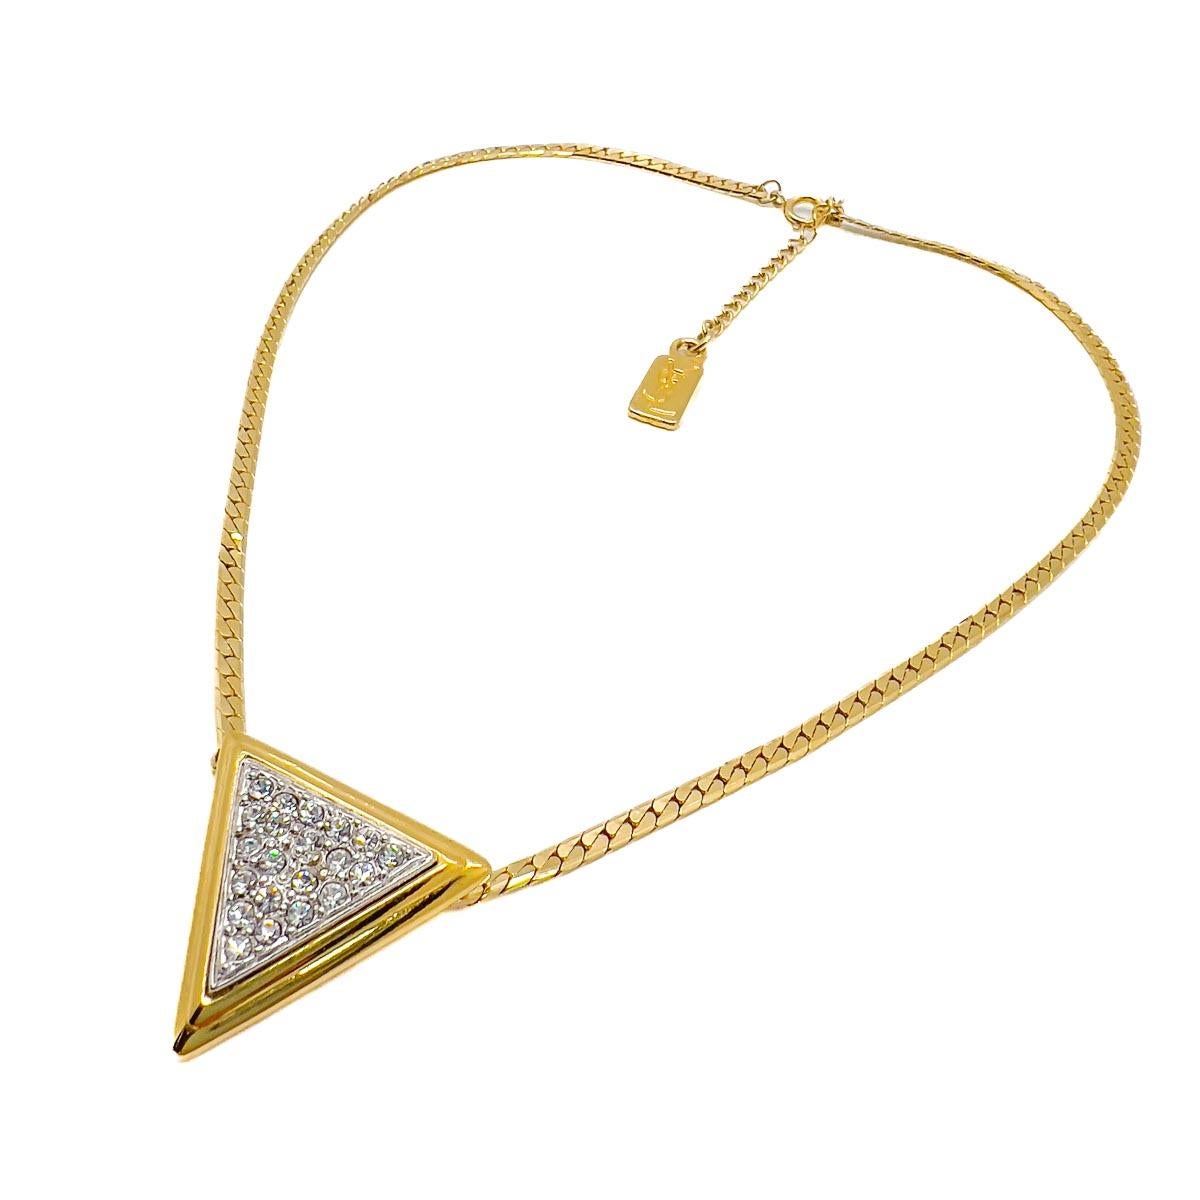 A Vintage YSL Geo Necklace featuring a flattened curb chain adorned with a geometric design pendant lavishly embellished with crystals. Pure contemporary chic from the ultra stylish House of YSL.

In 1961, following his time as Dior's Art Director,